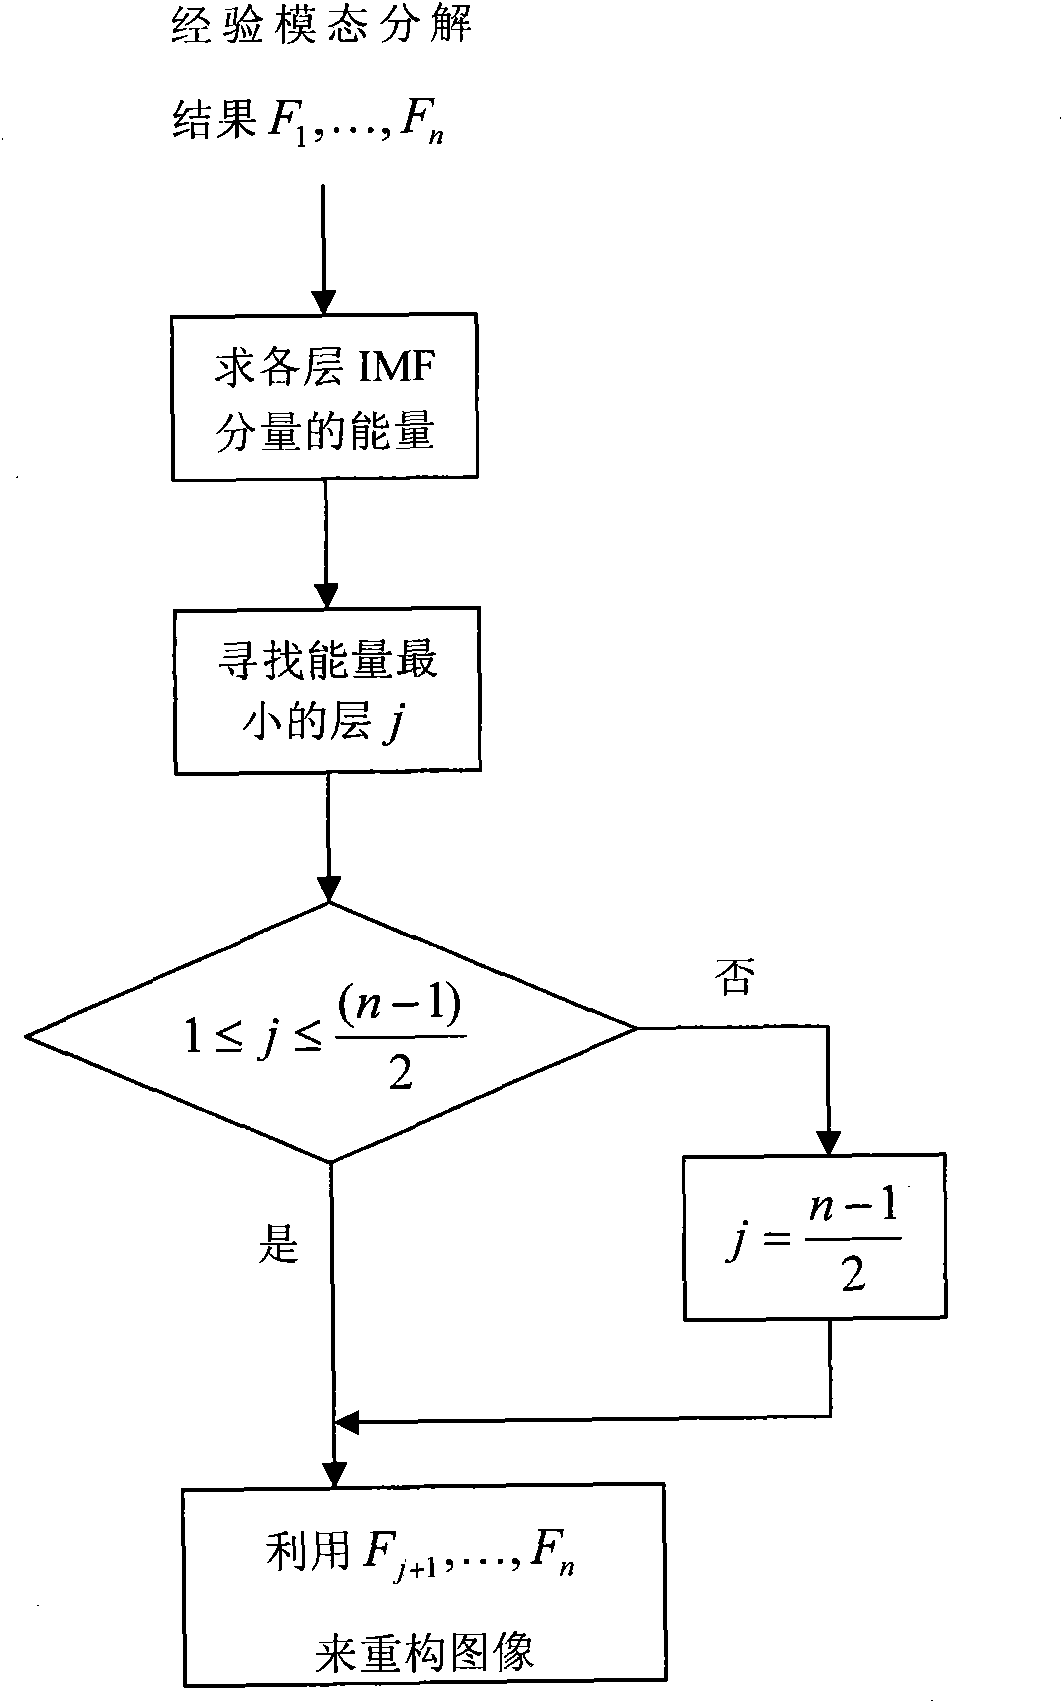 Method for recognizing image scale invariant pattern under noise condition